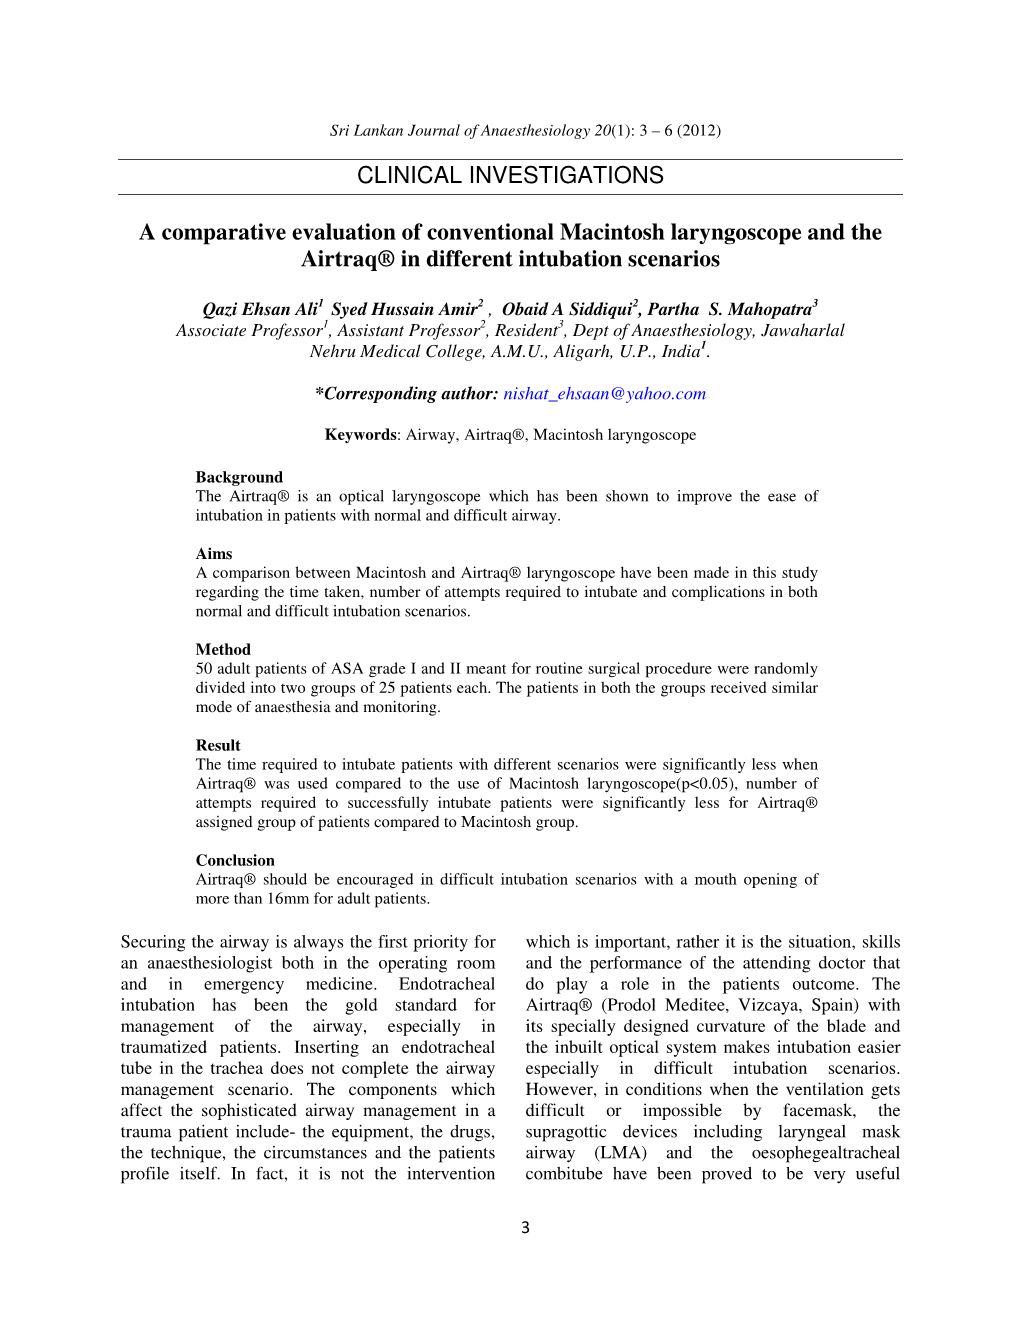 CLINICAL INVESTIGATIONS a Comparative Evaluation Of